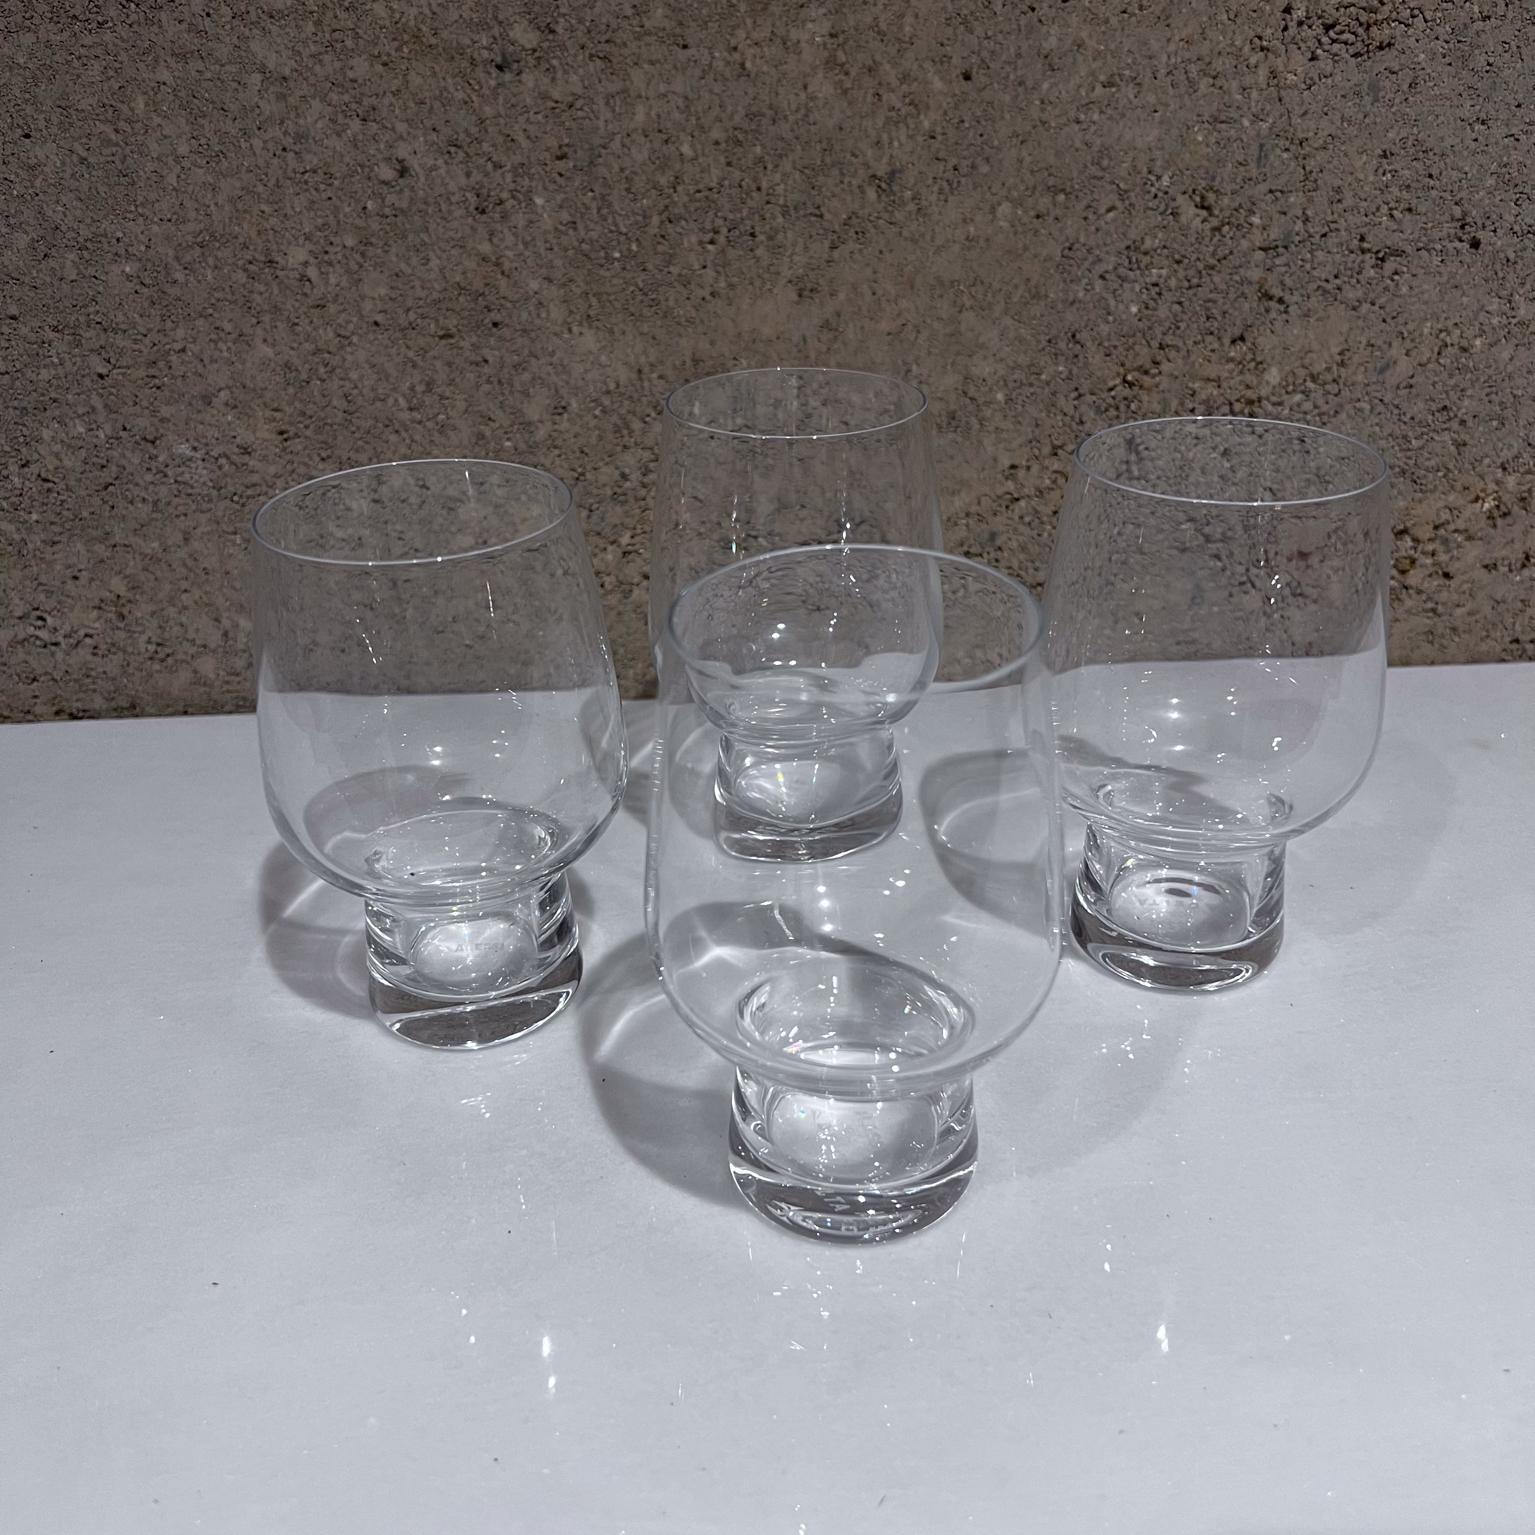 AMBIANIC presents
Alessi for Delta Airlines Modern Set of Four Wine Juice Gasses Italy
4.25 h x 2.75 diameter
Preowned original vintage
Refer to images.